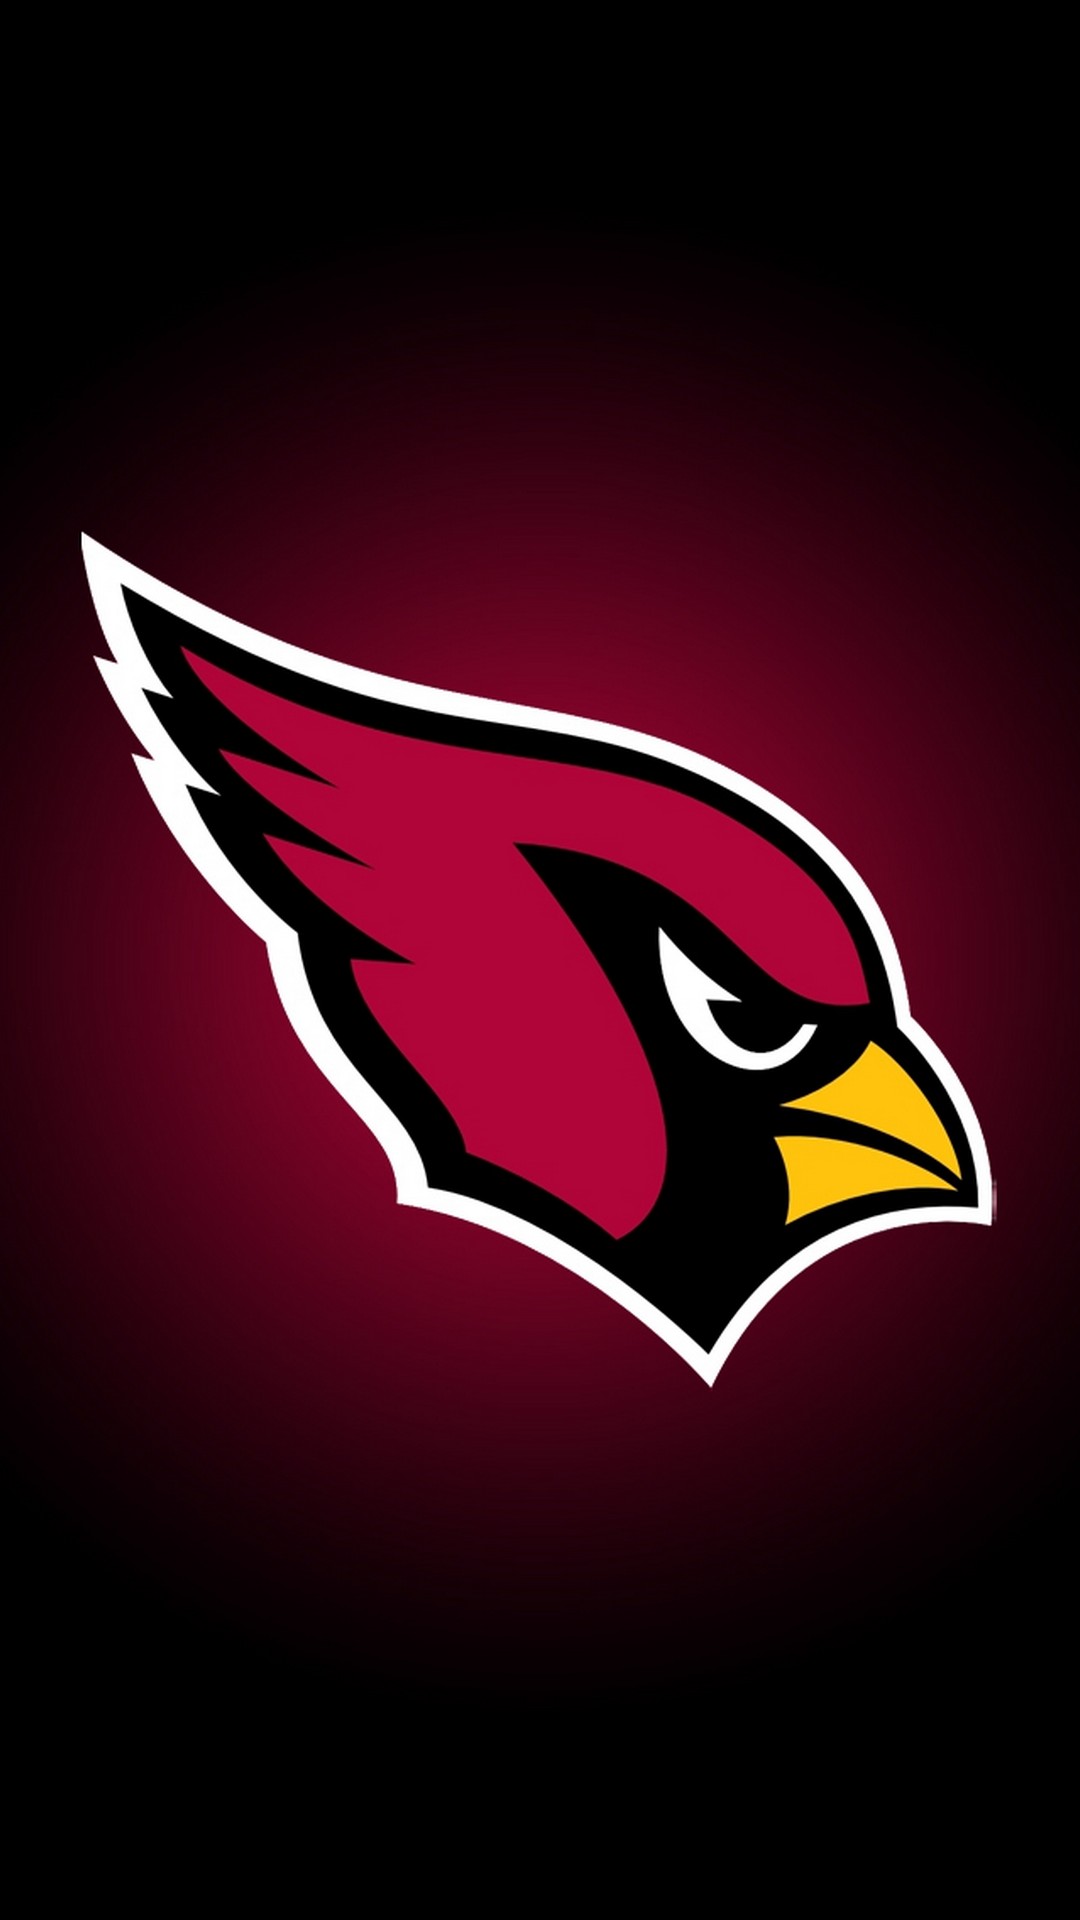 Arizona Cardinals iPhone 6s Plus Wallpaper With high-resolution 1080X1920 pixel. Download and set as wallpaper for Apple iPhone X, XS Max, XR, 8, 7, 6, SE, iPad, Android